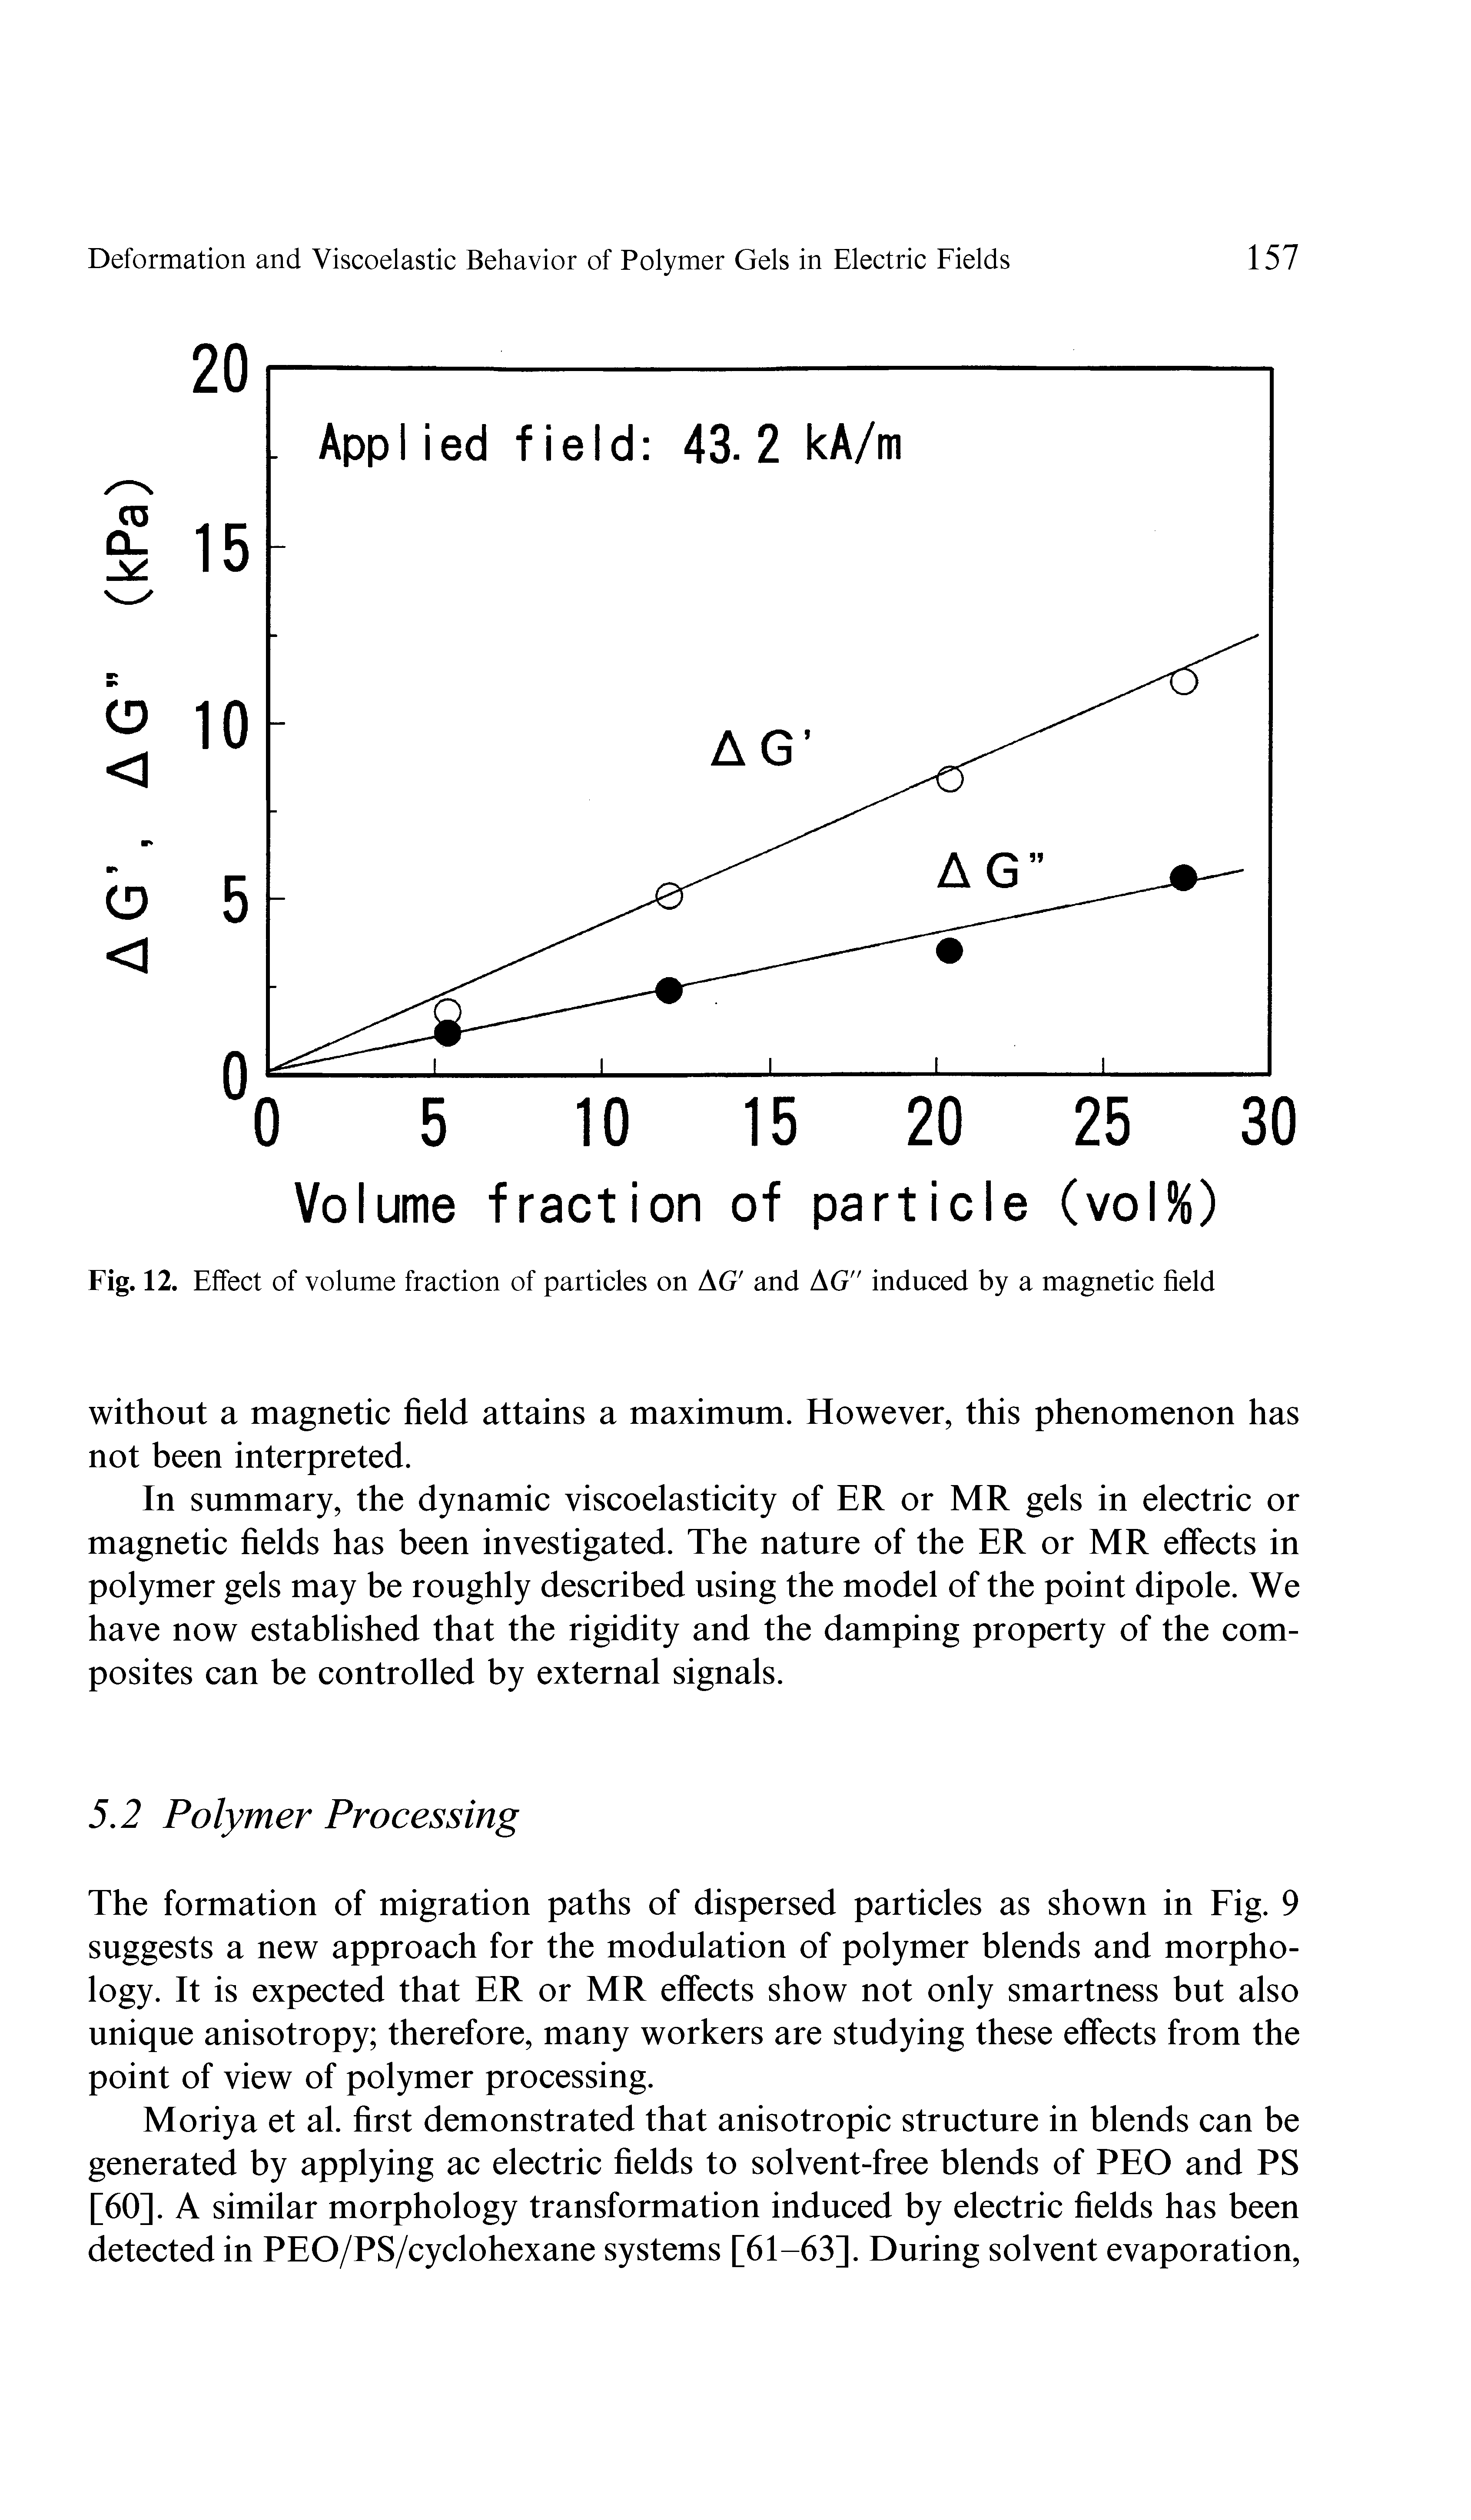 Fig. 12. Effect of volume fraction of particles on AG and AG" induced by a magnetic field...